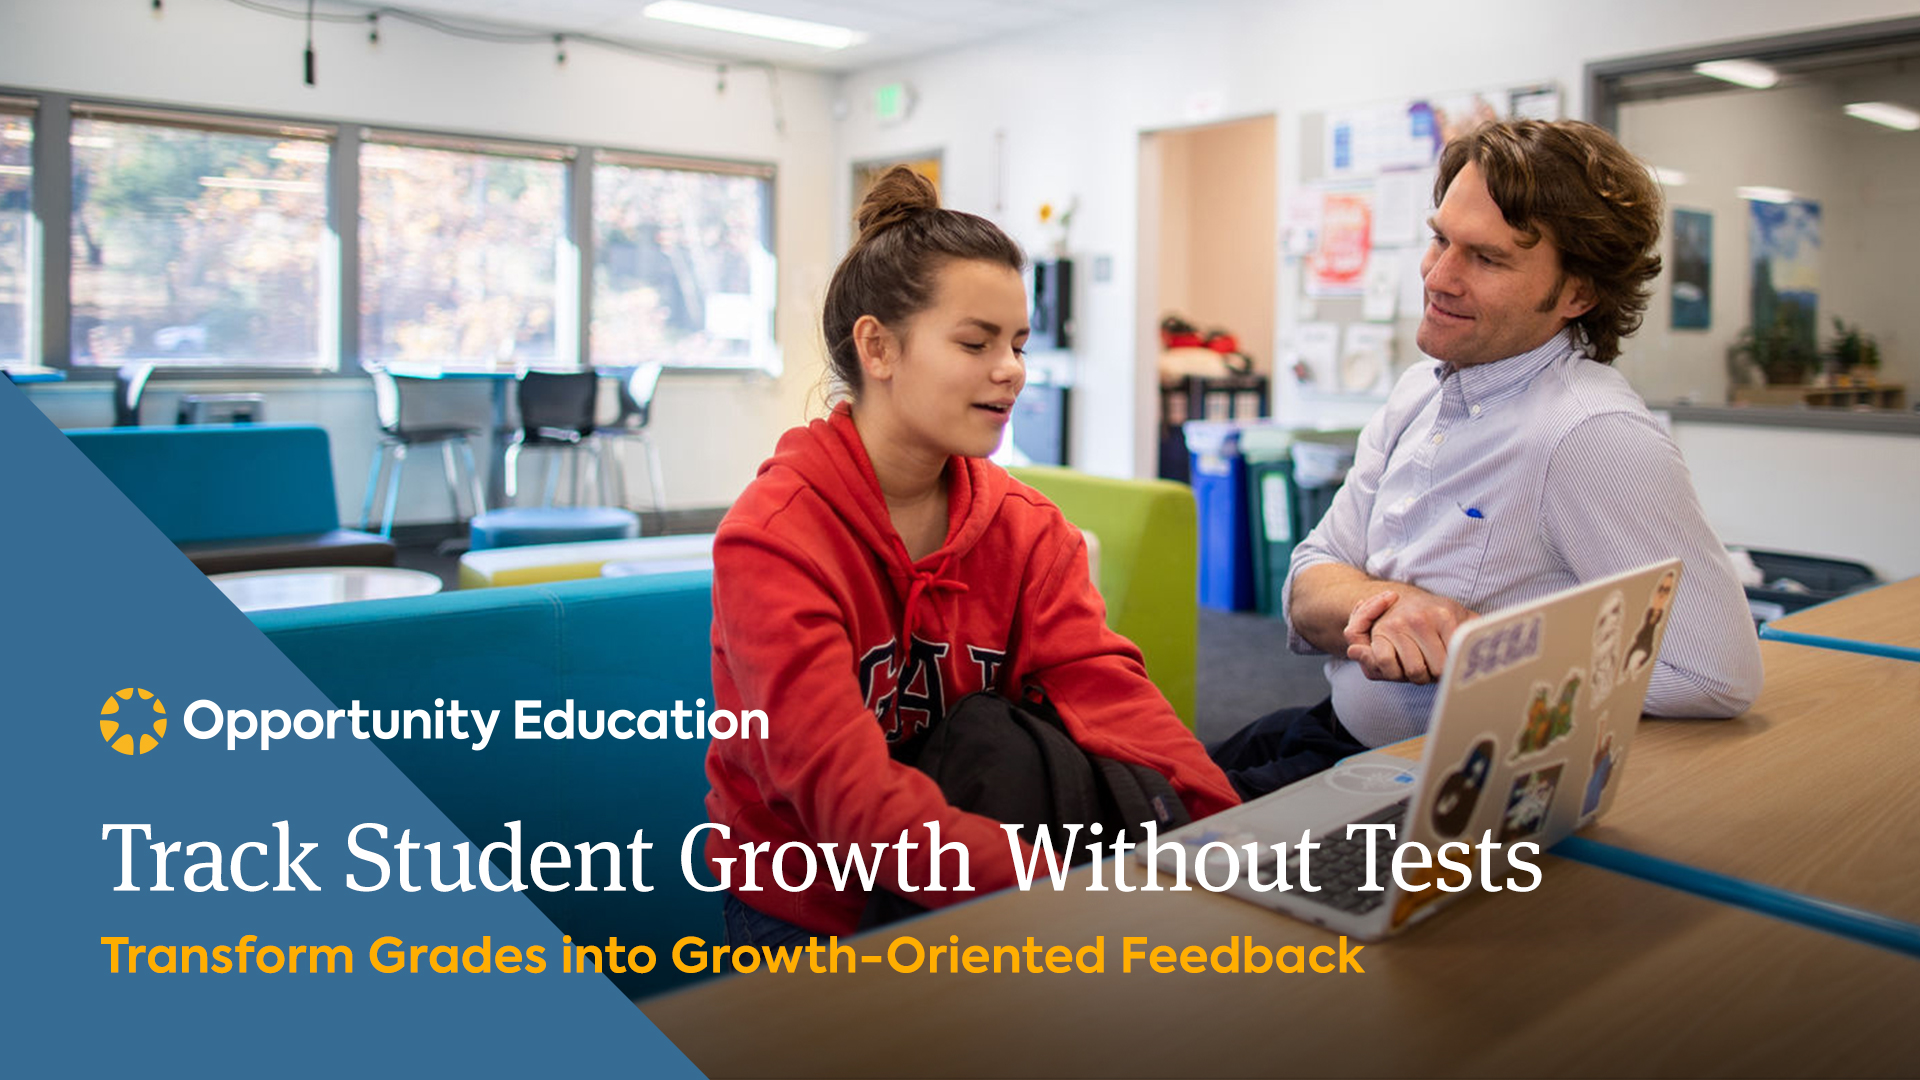 Join Opportunity Education to learn how to transform grade-focused assessments into growth-oriented feedback at your high school.